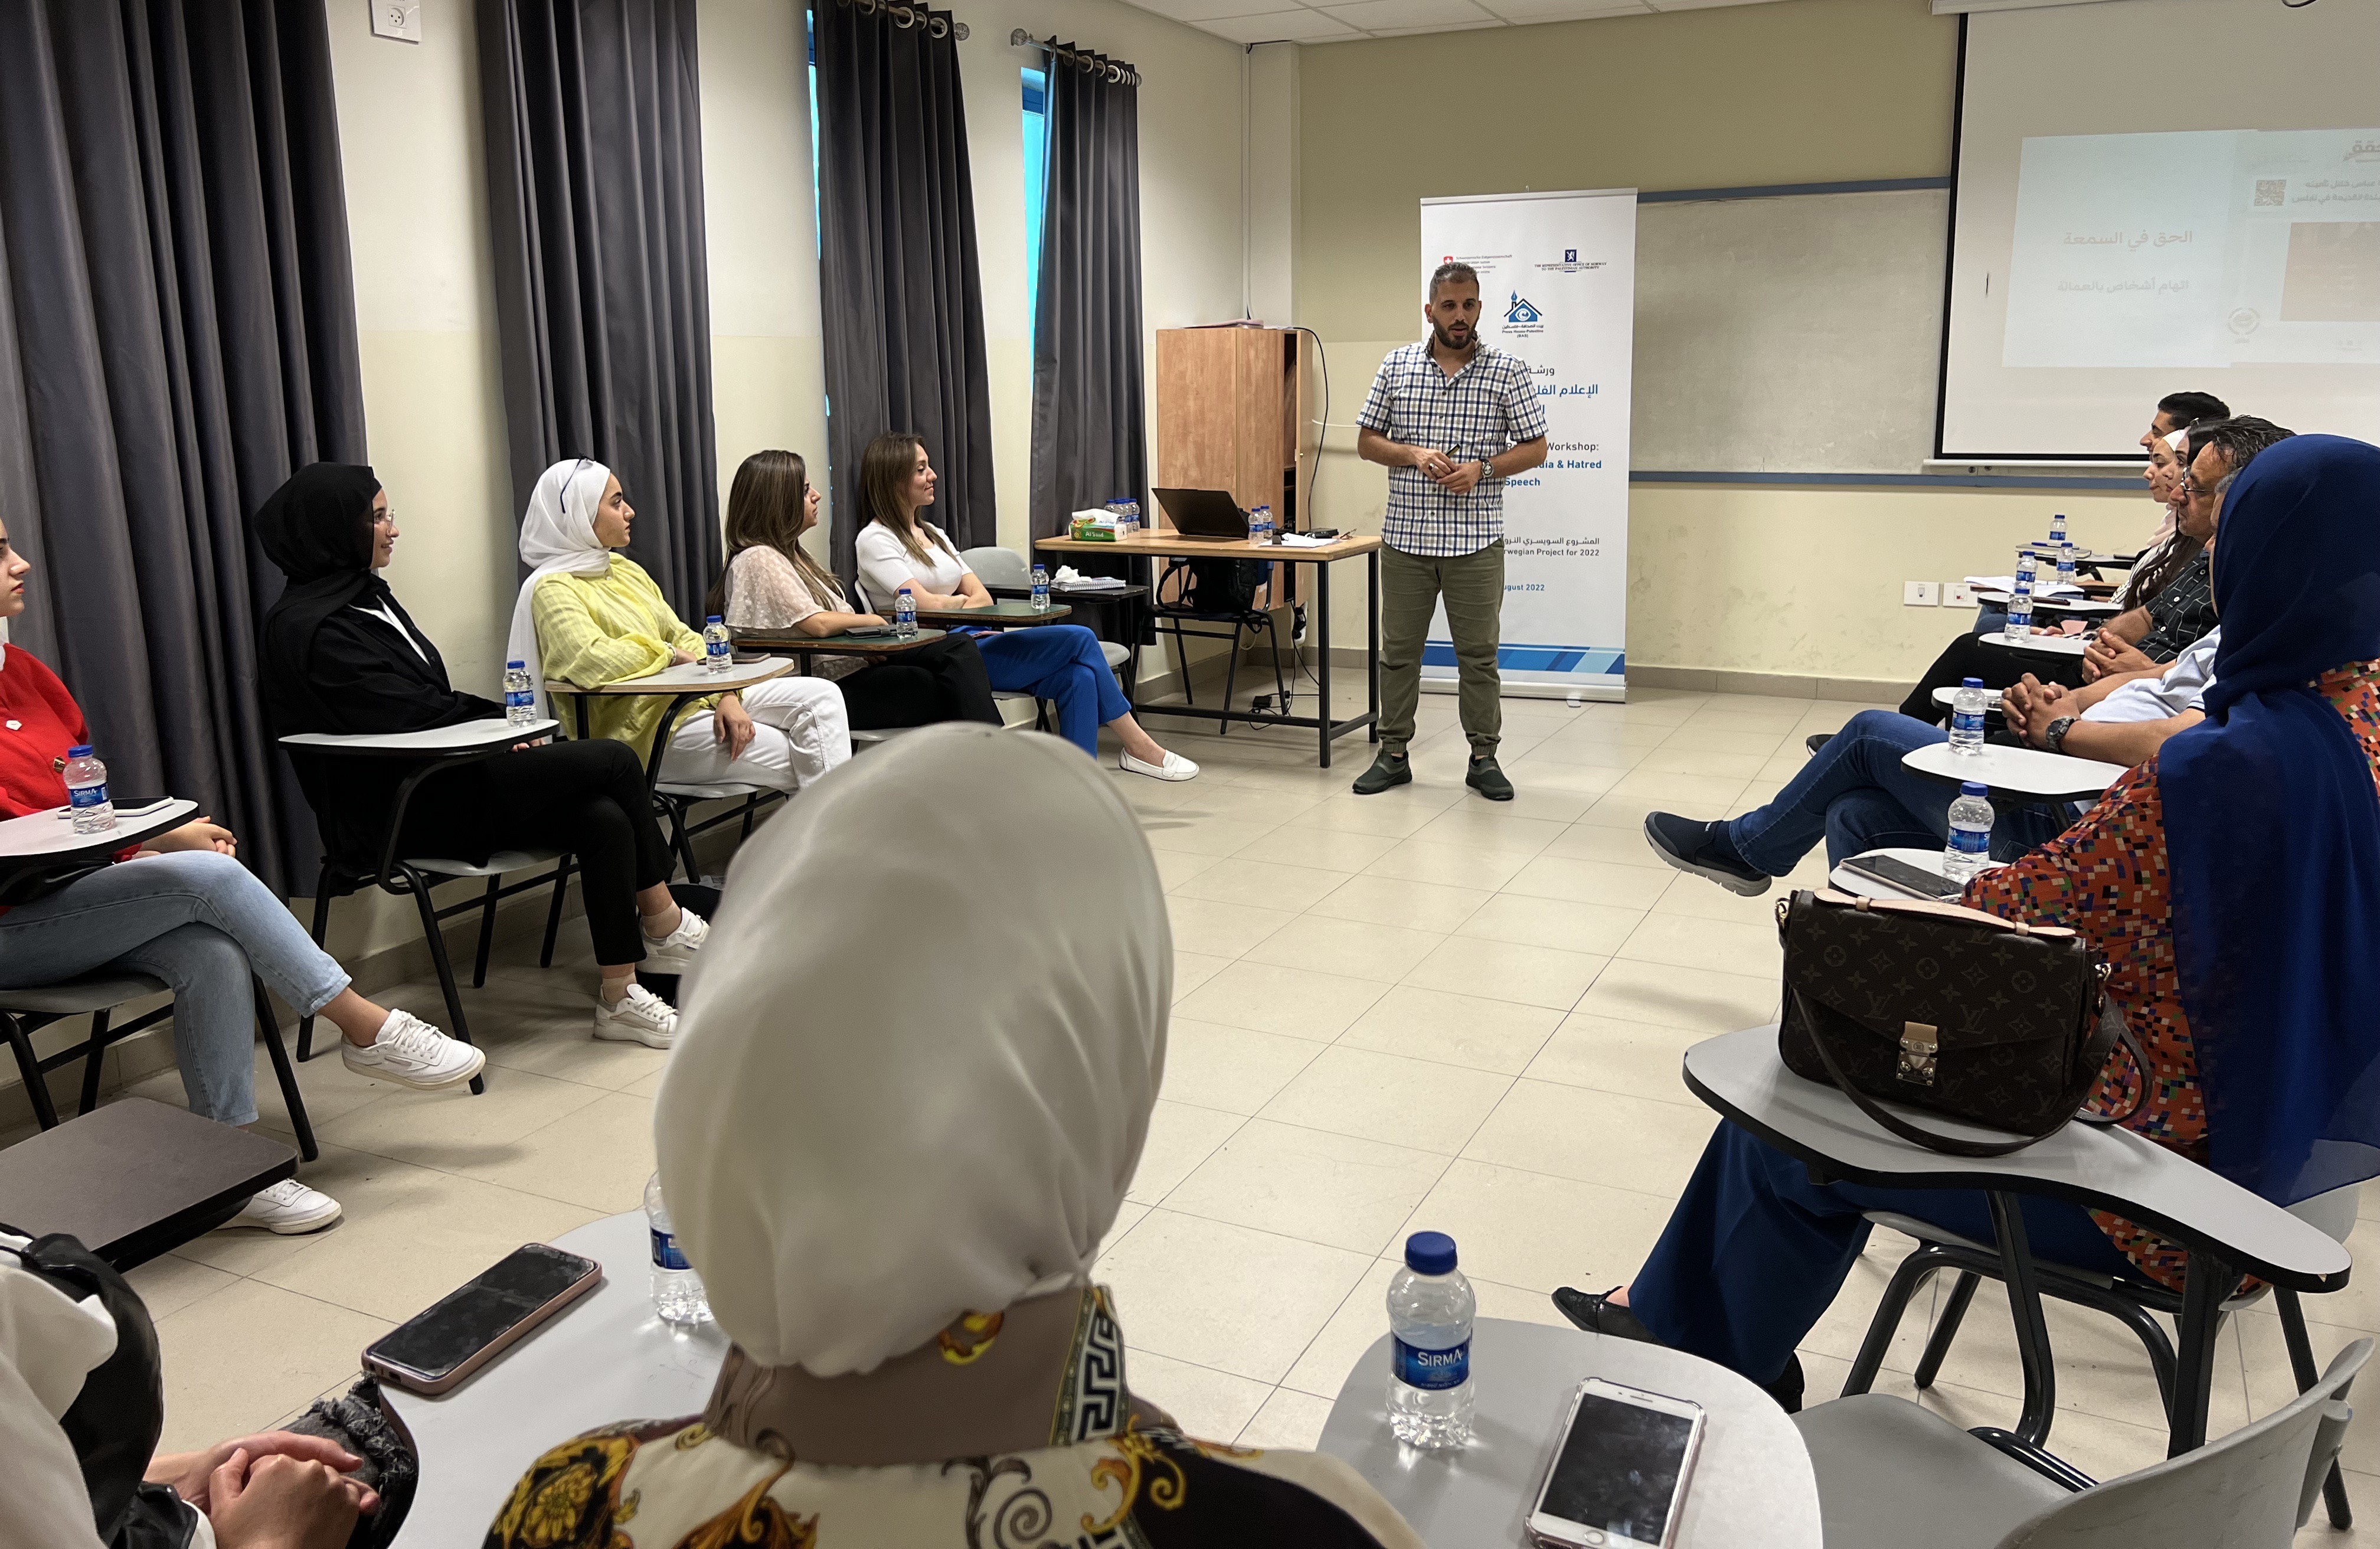 Press House holds an awareness workshop on "The Palestinian media and Hatred Speech"